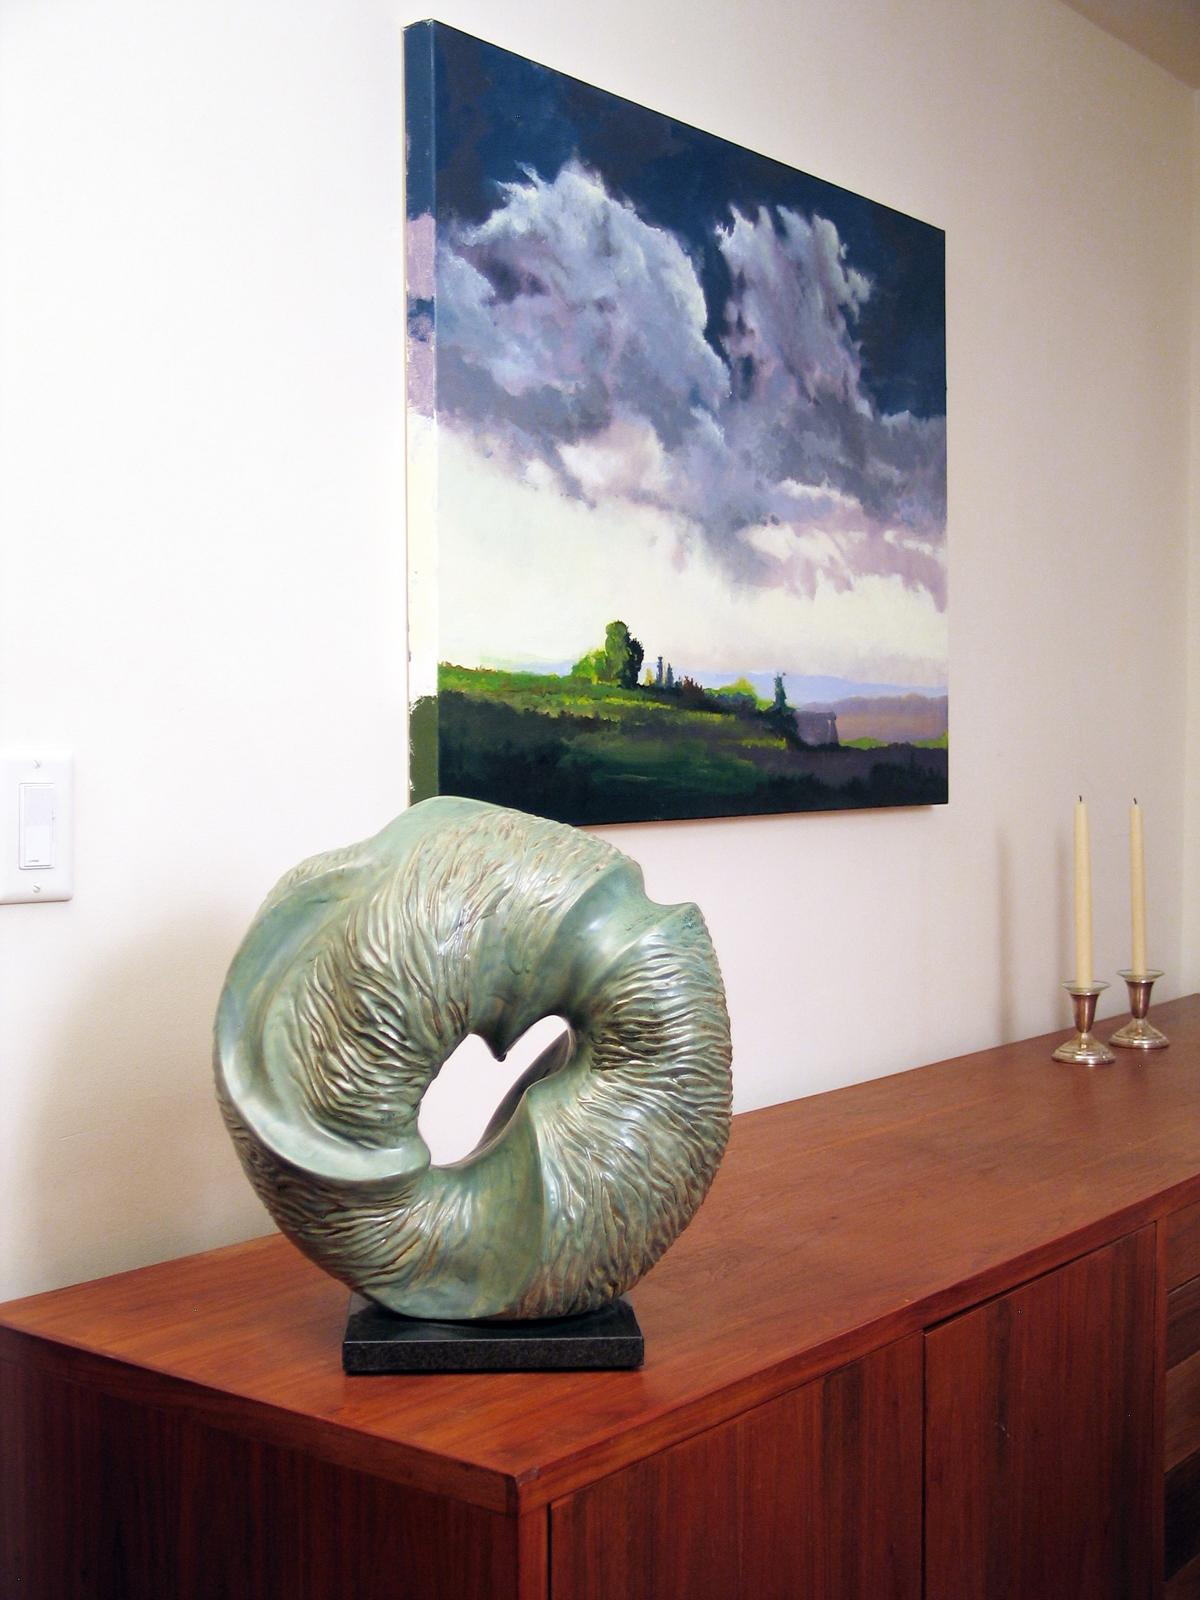 “Aqua Incision”, blue green circular ceramic, carved with flowing water lines  - Black Abstract Sculpture by Elaine Lorenz